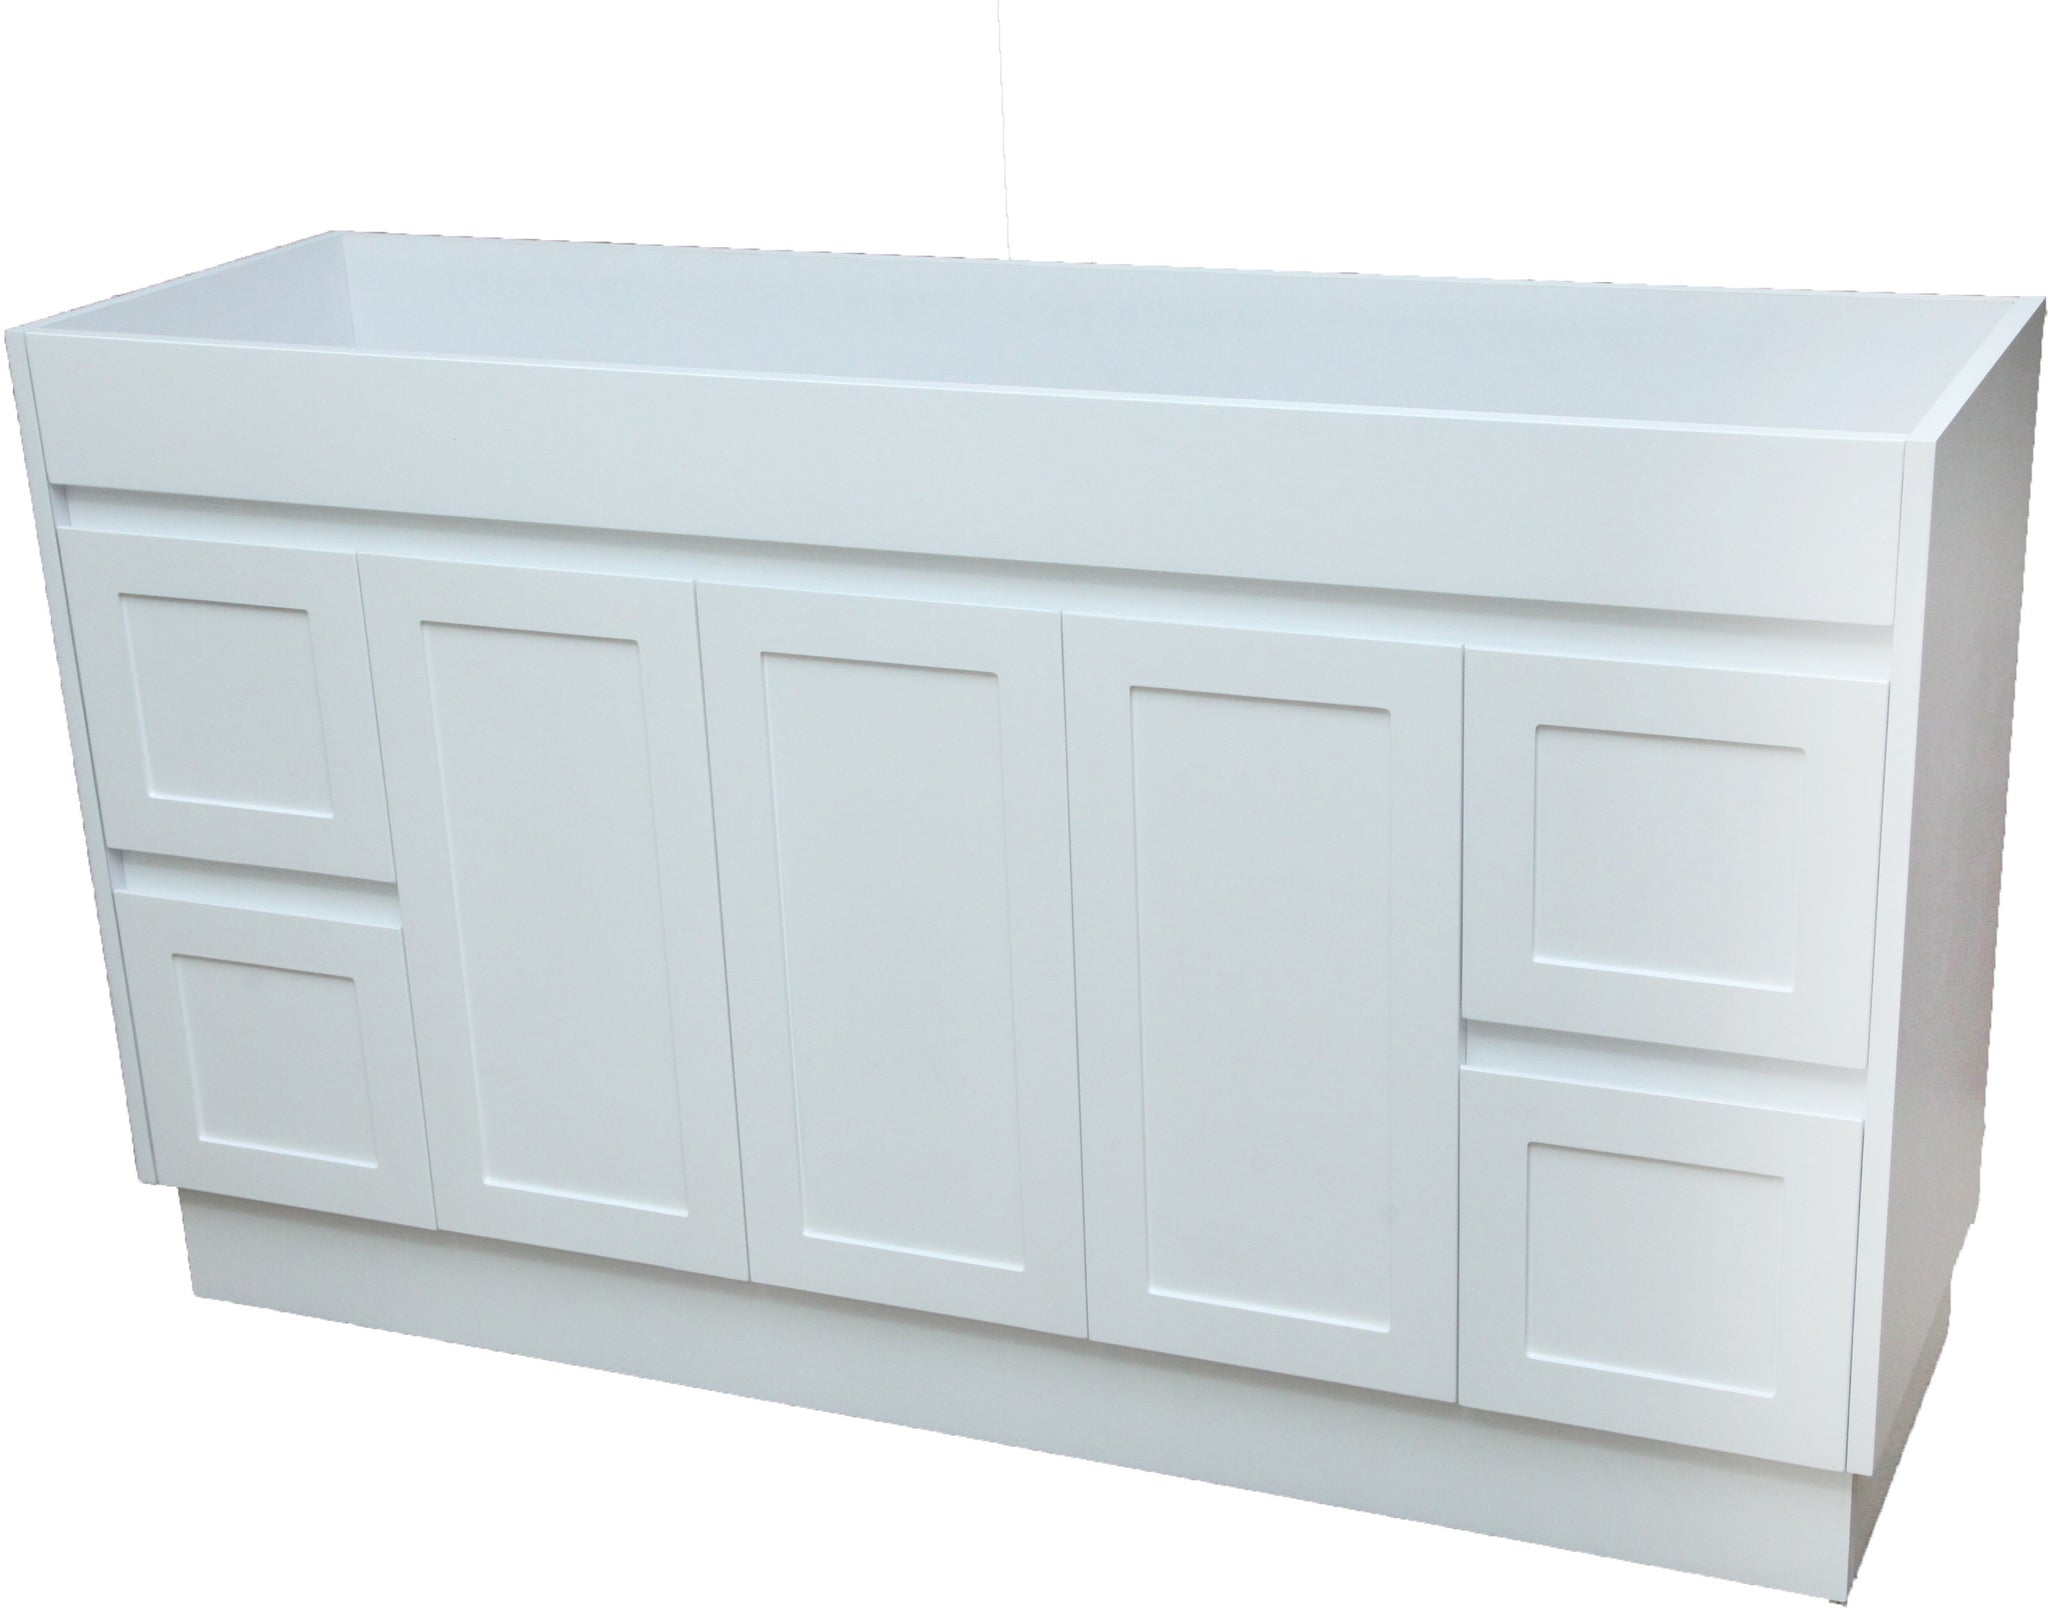 QUIN SERIES 1500 Cabinet Only